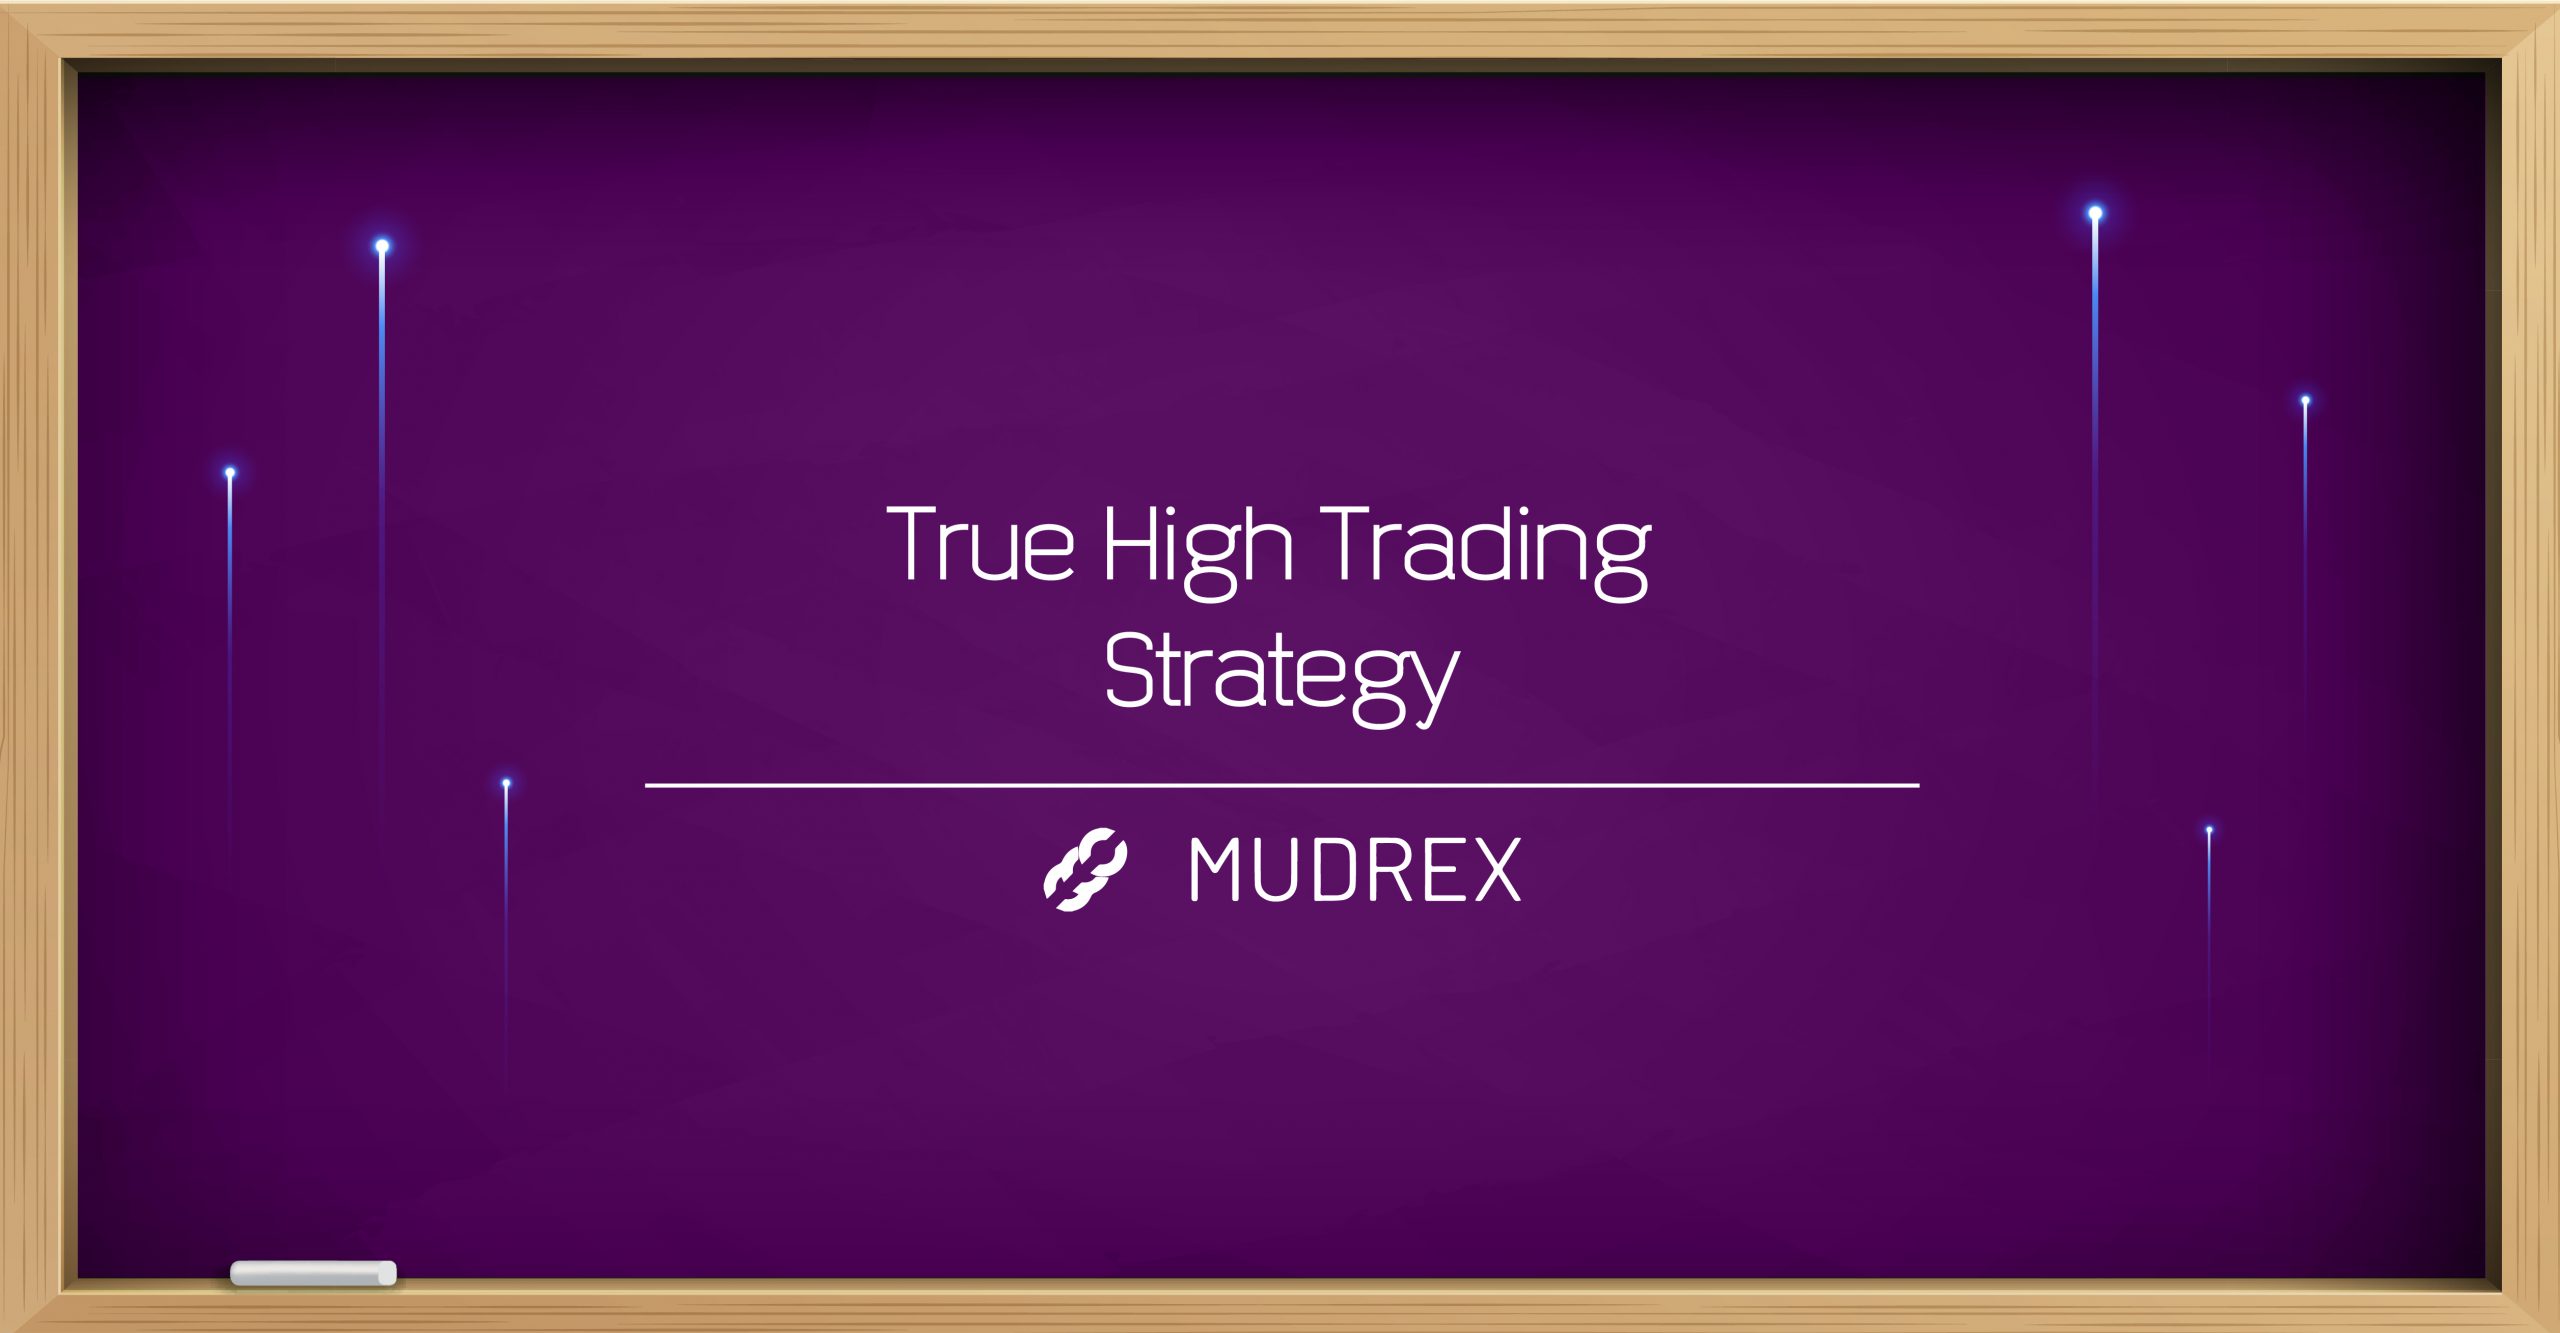 True High Trading Strategy